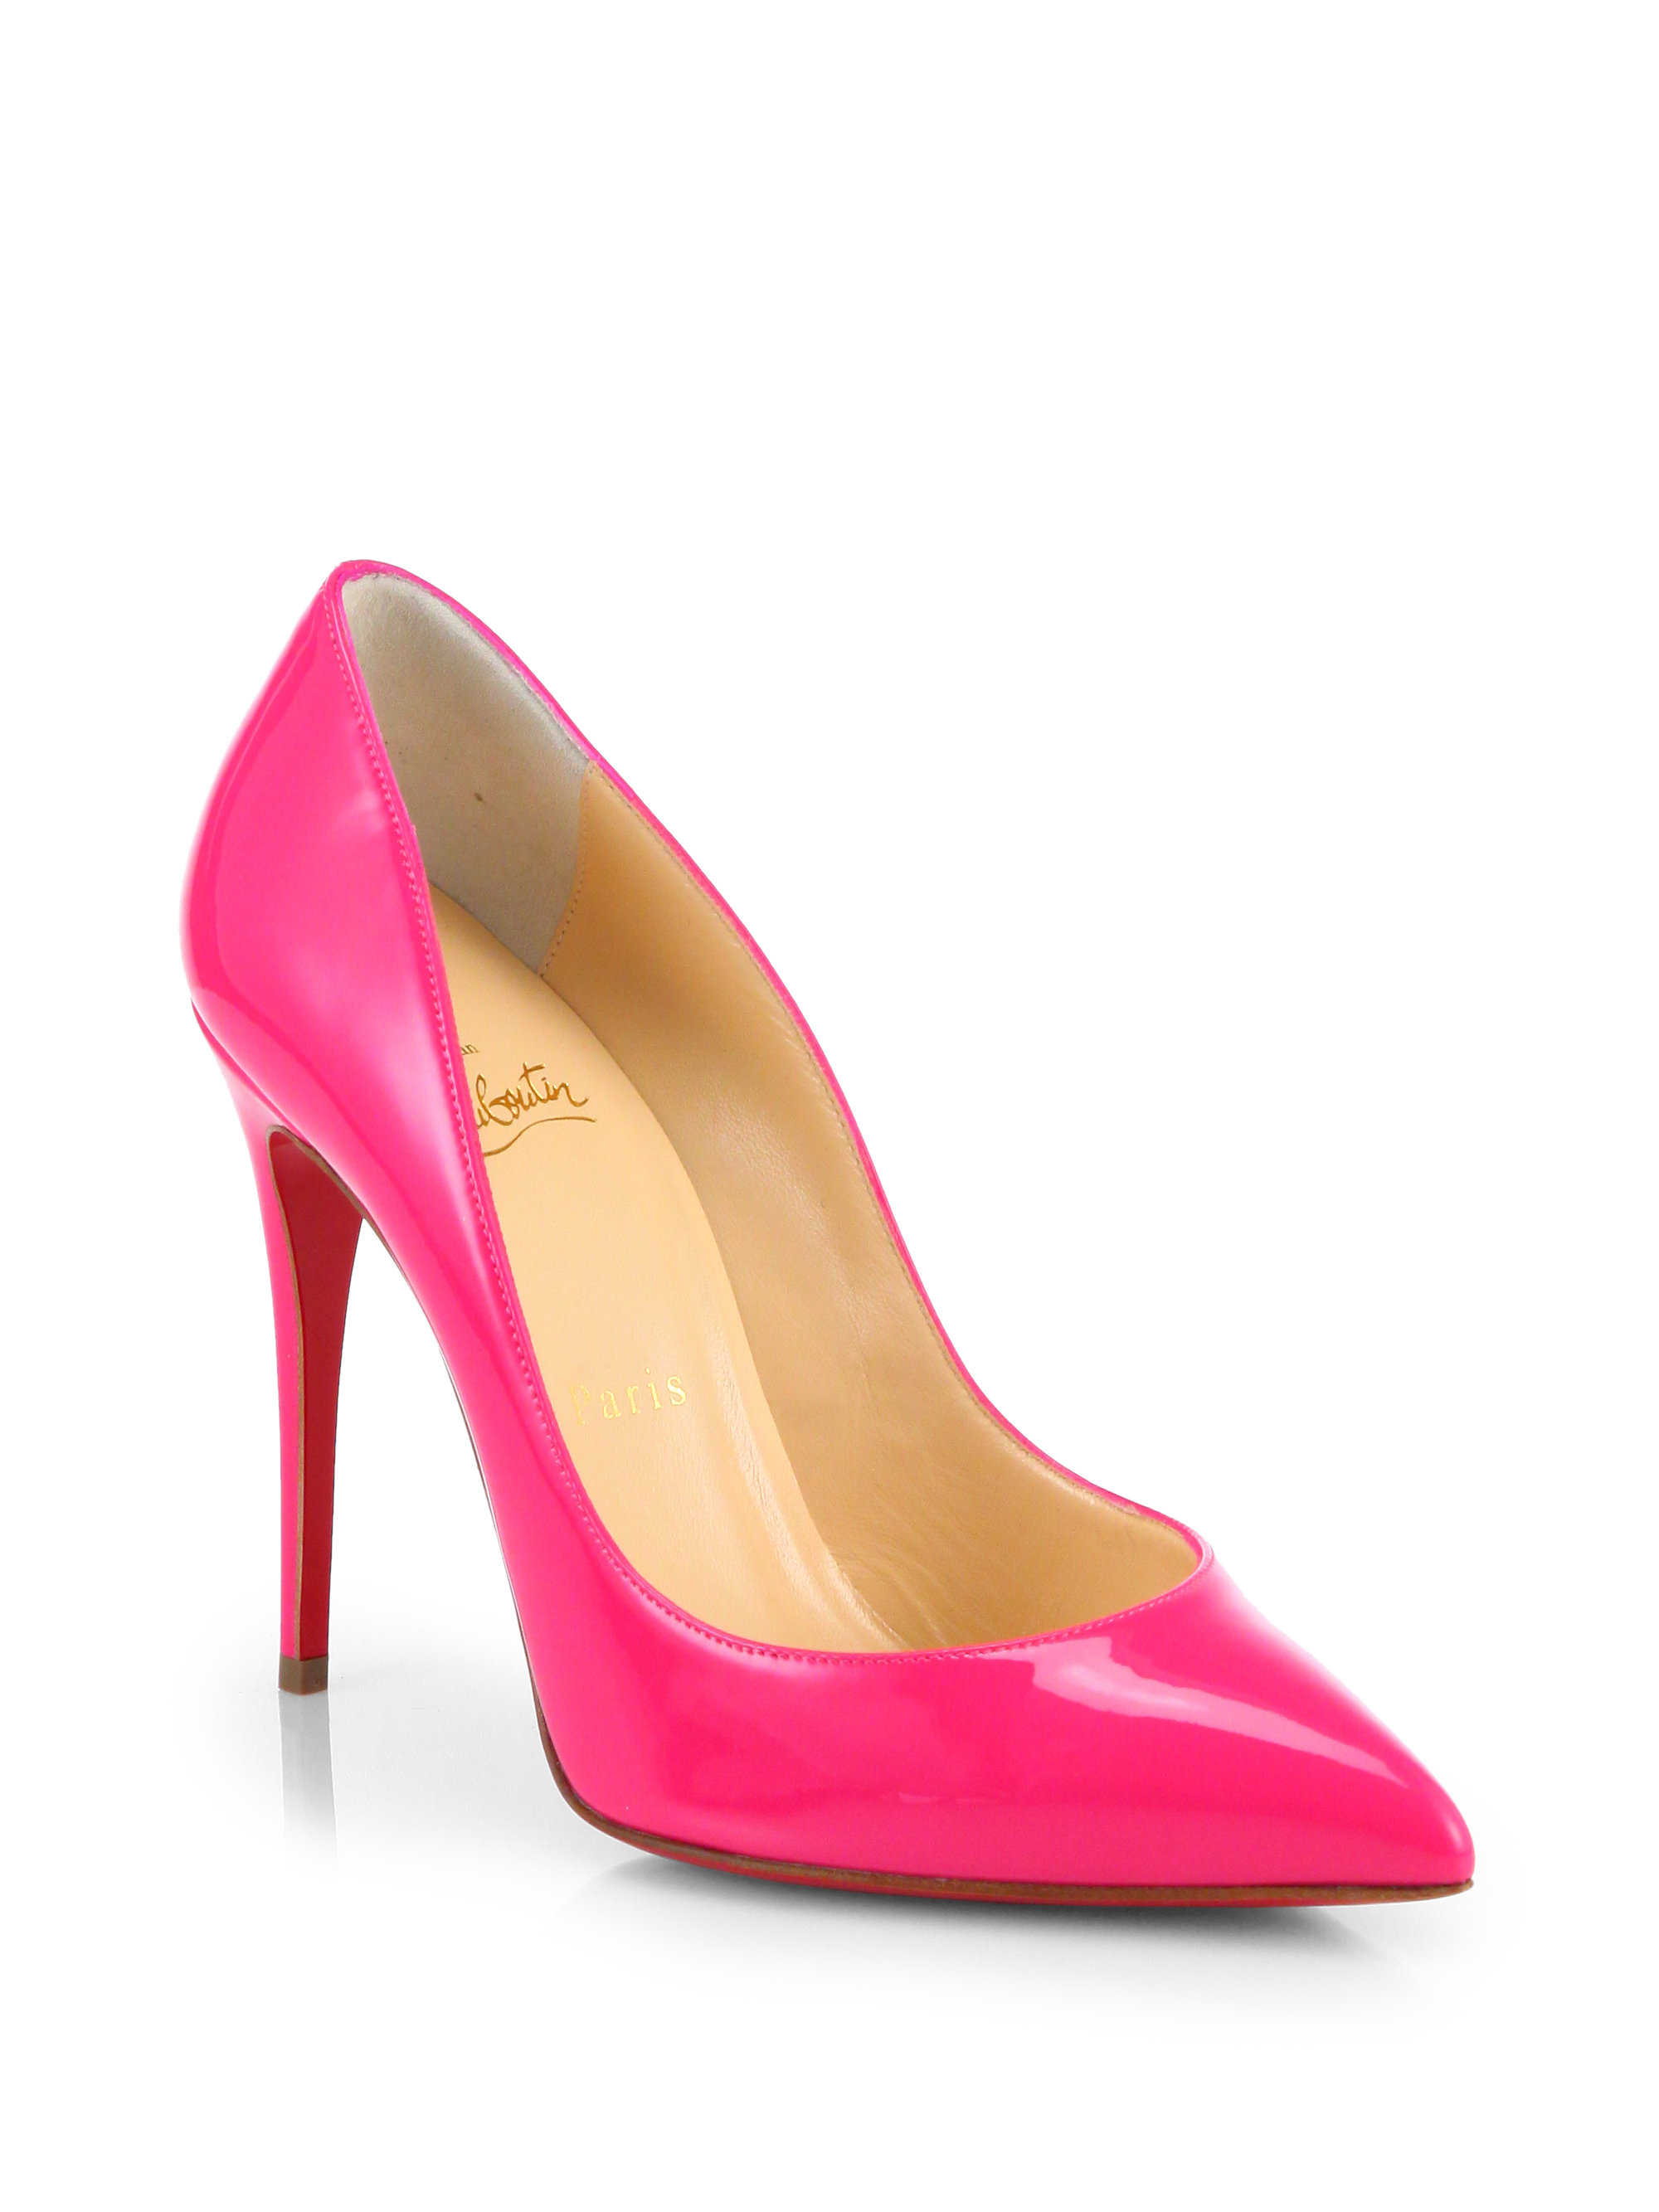 Christian Louboutin Pigalle Follies Patentleather Pumps in Pink | Lyst